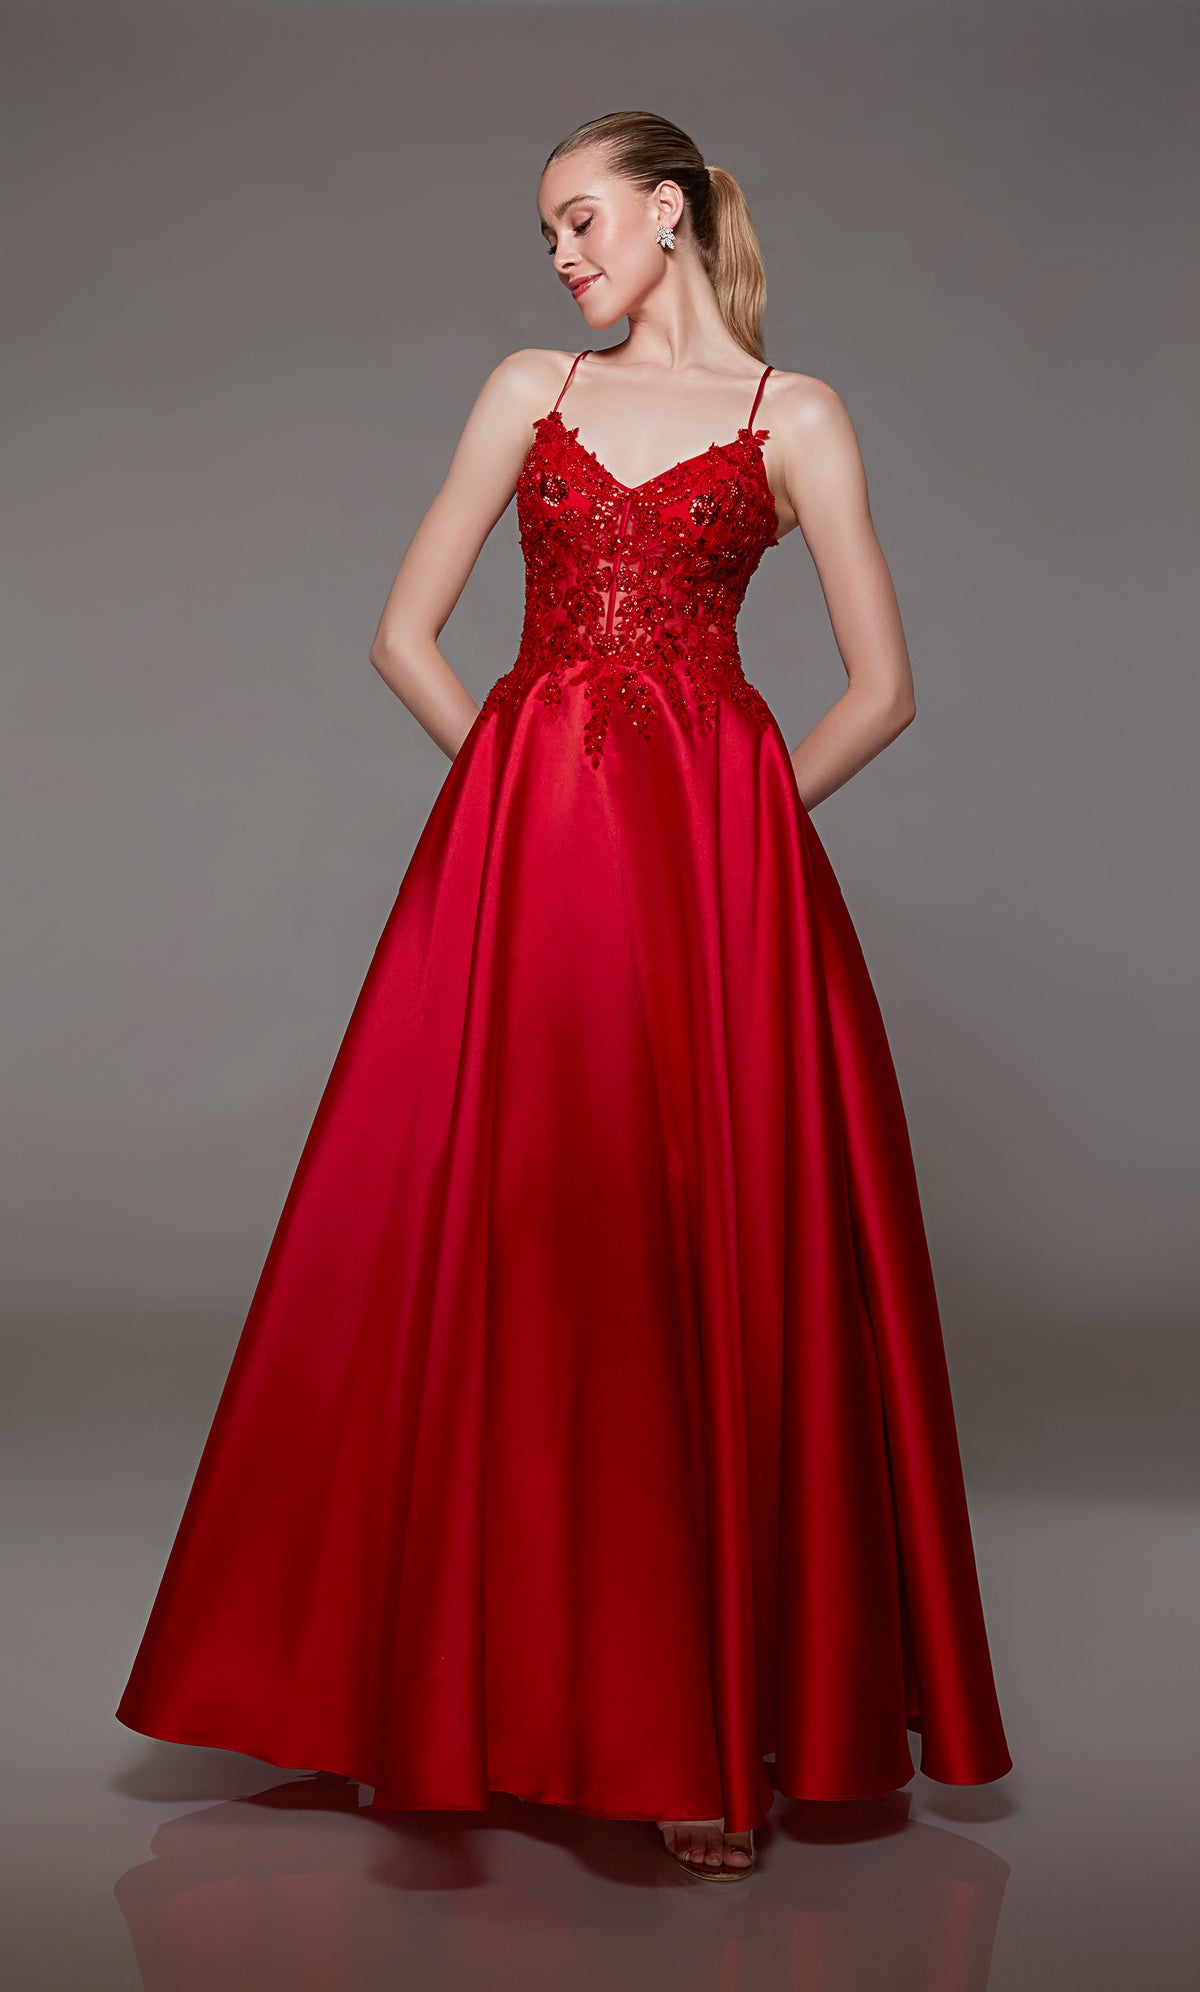 Red corset ball gown: V-neckline, sheer floral lace bodice, full mikado skirt, lace-up back for an captivating and timeless look.